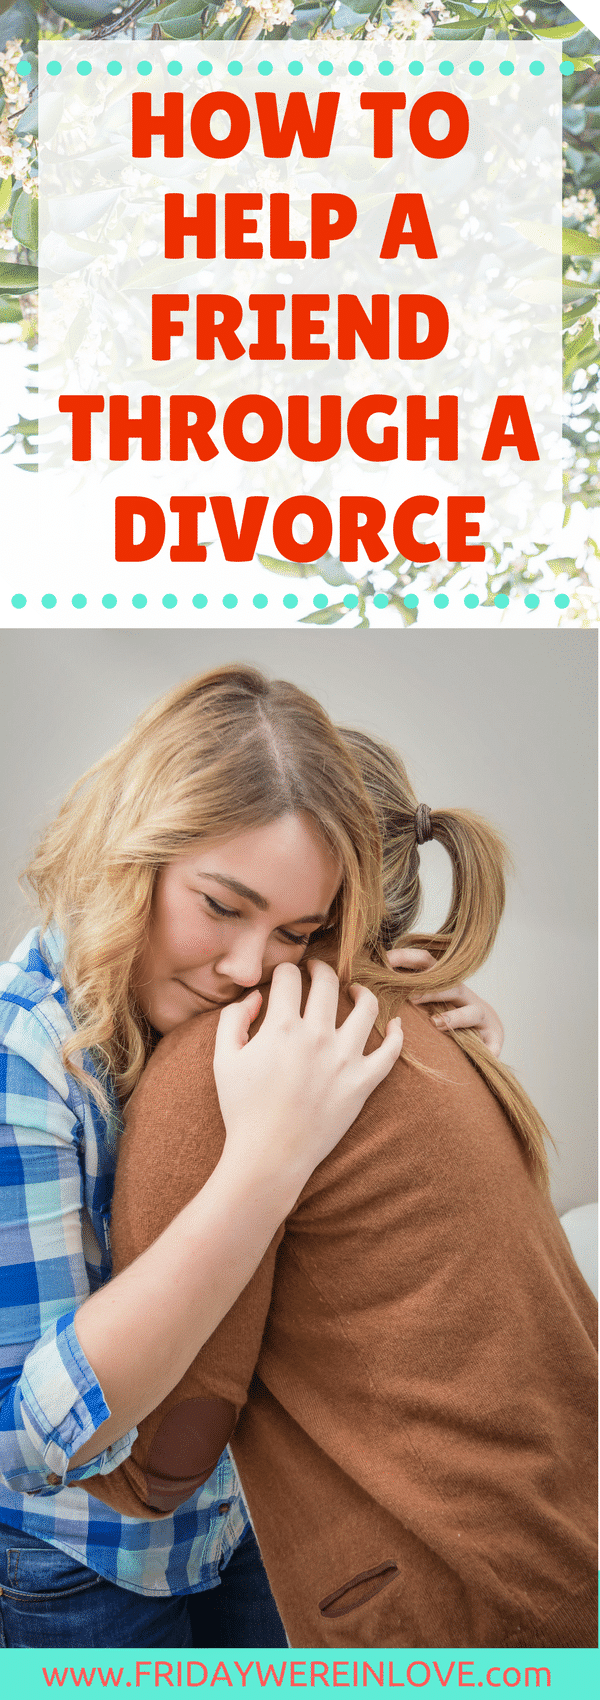 How to help a friend through a divorce- 7 ways to support a friend going through a divorce from someone who has been on both sides